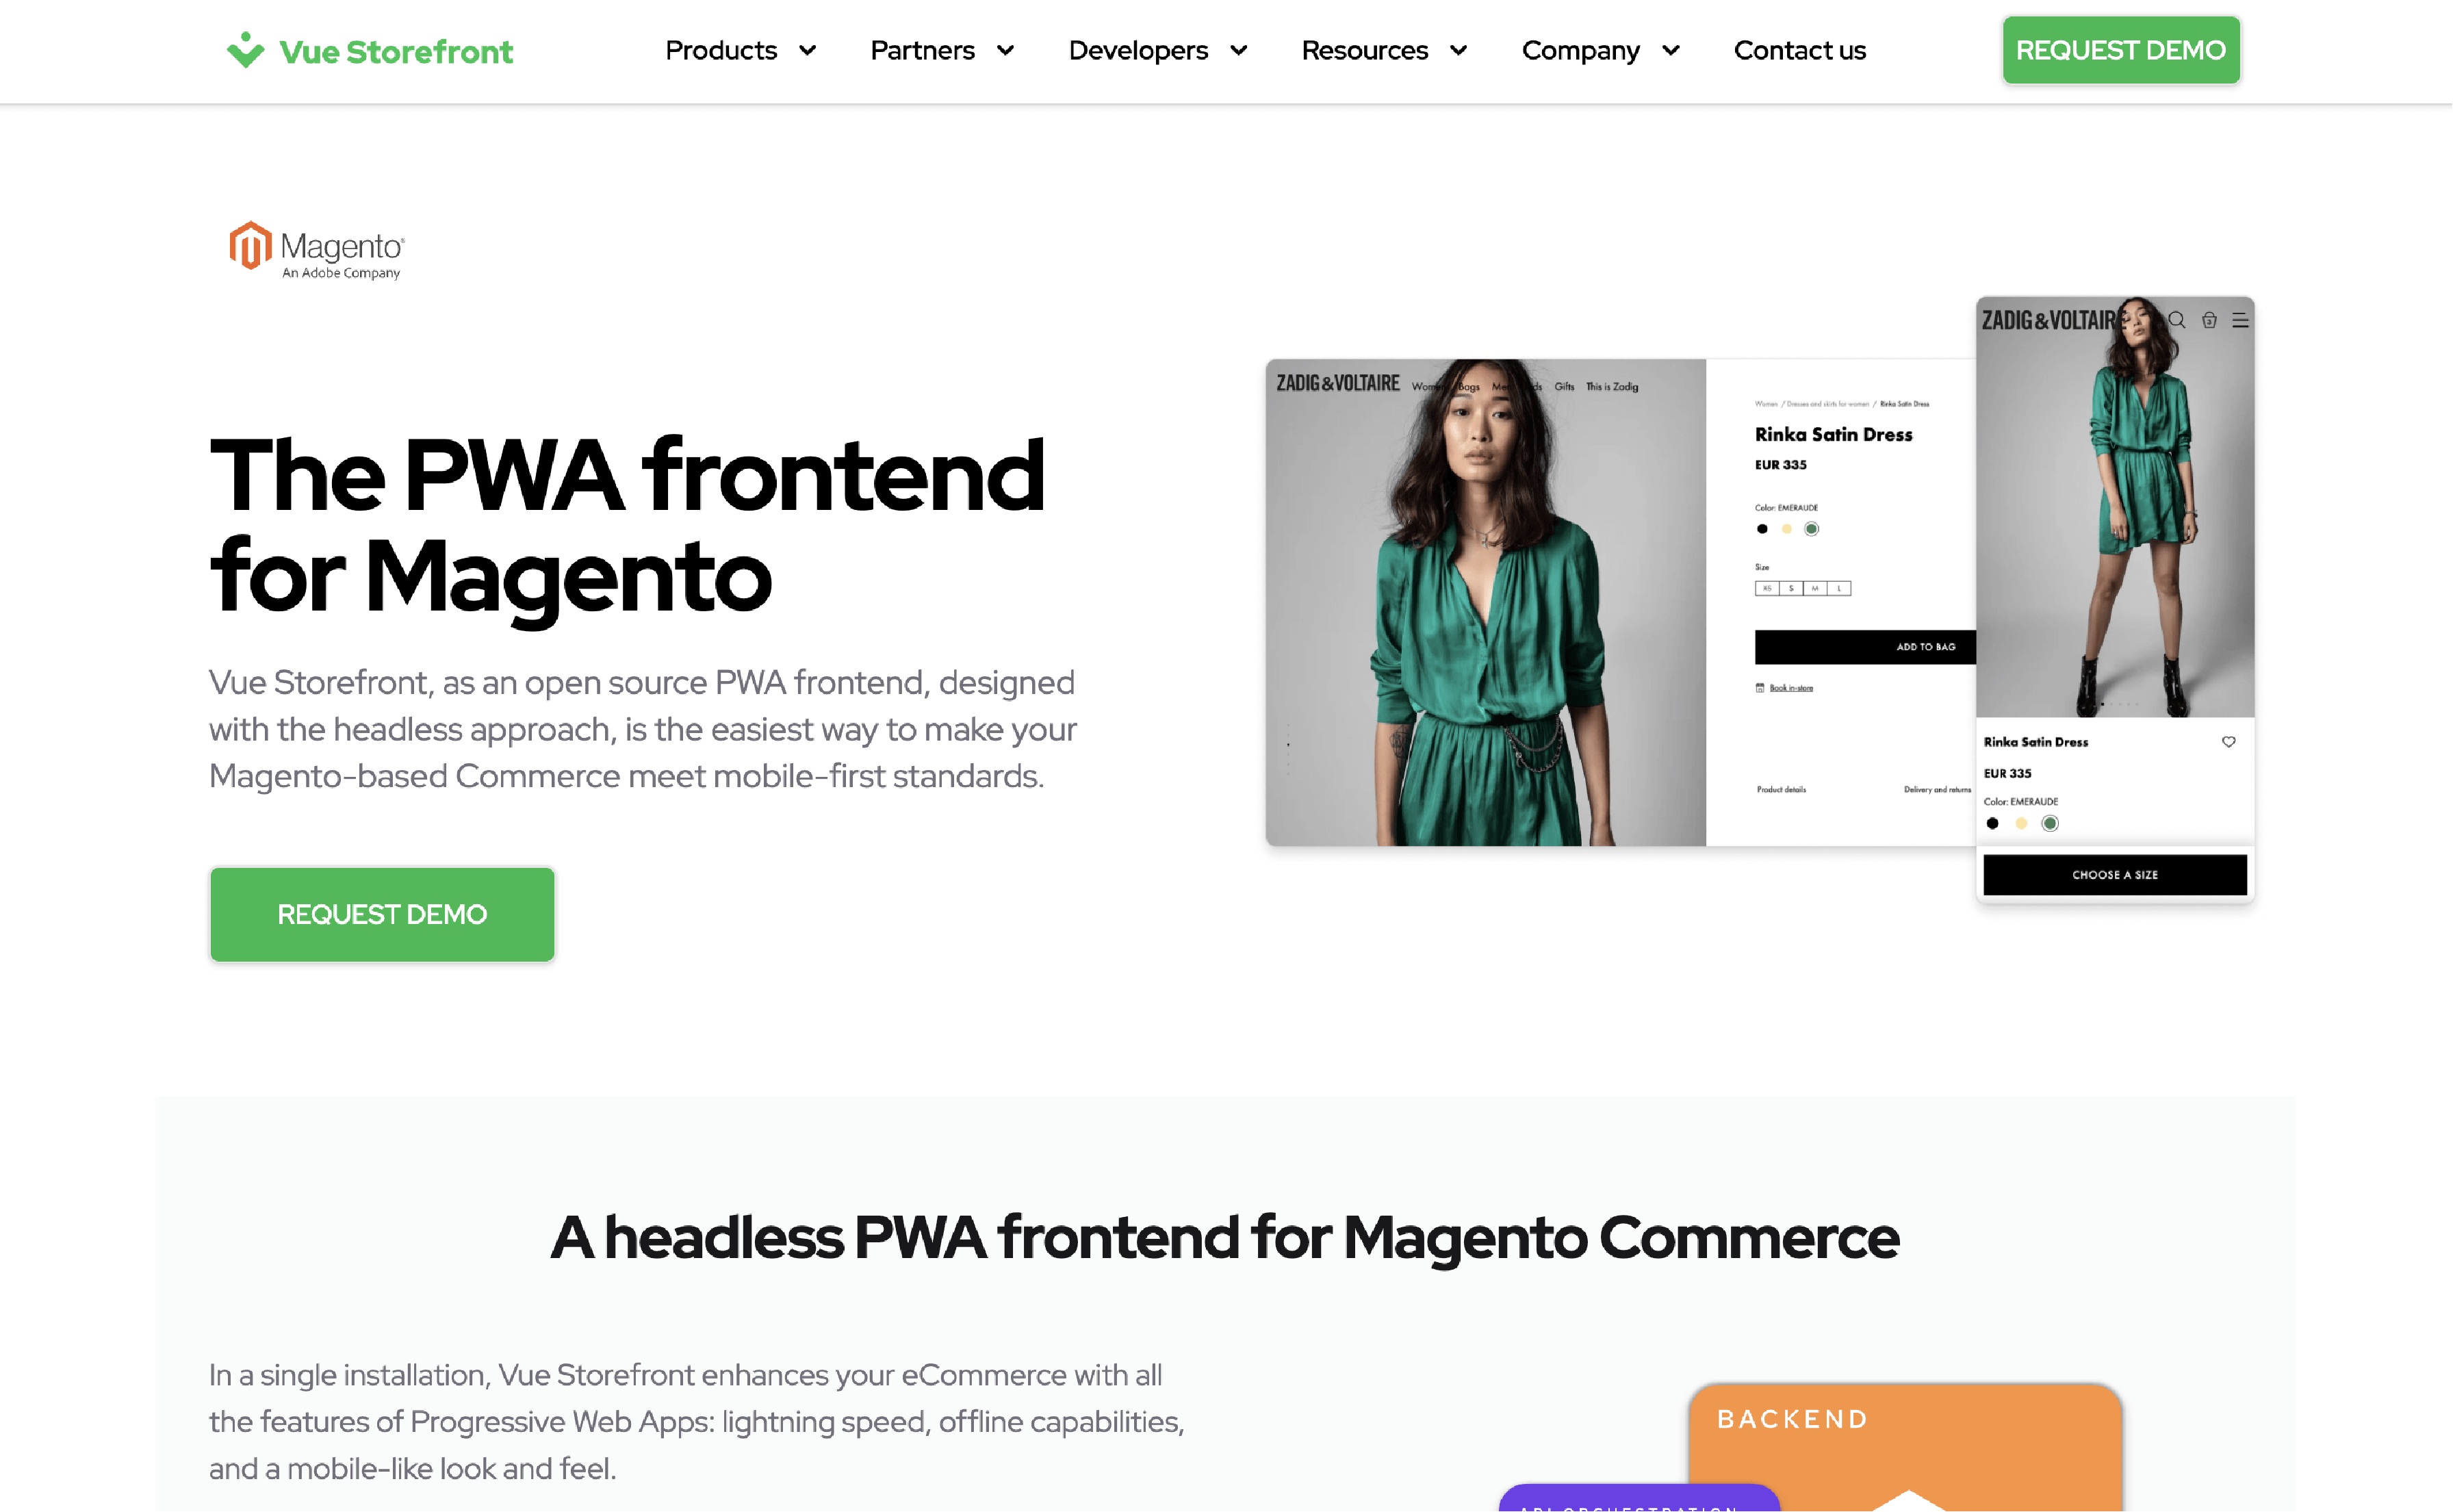 The PWA frontend for Magento by Vue Storefront for eCommerce stores